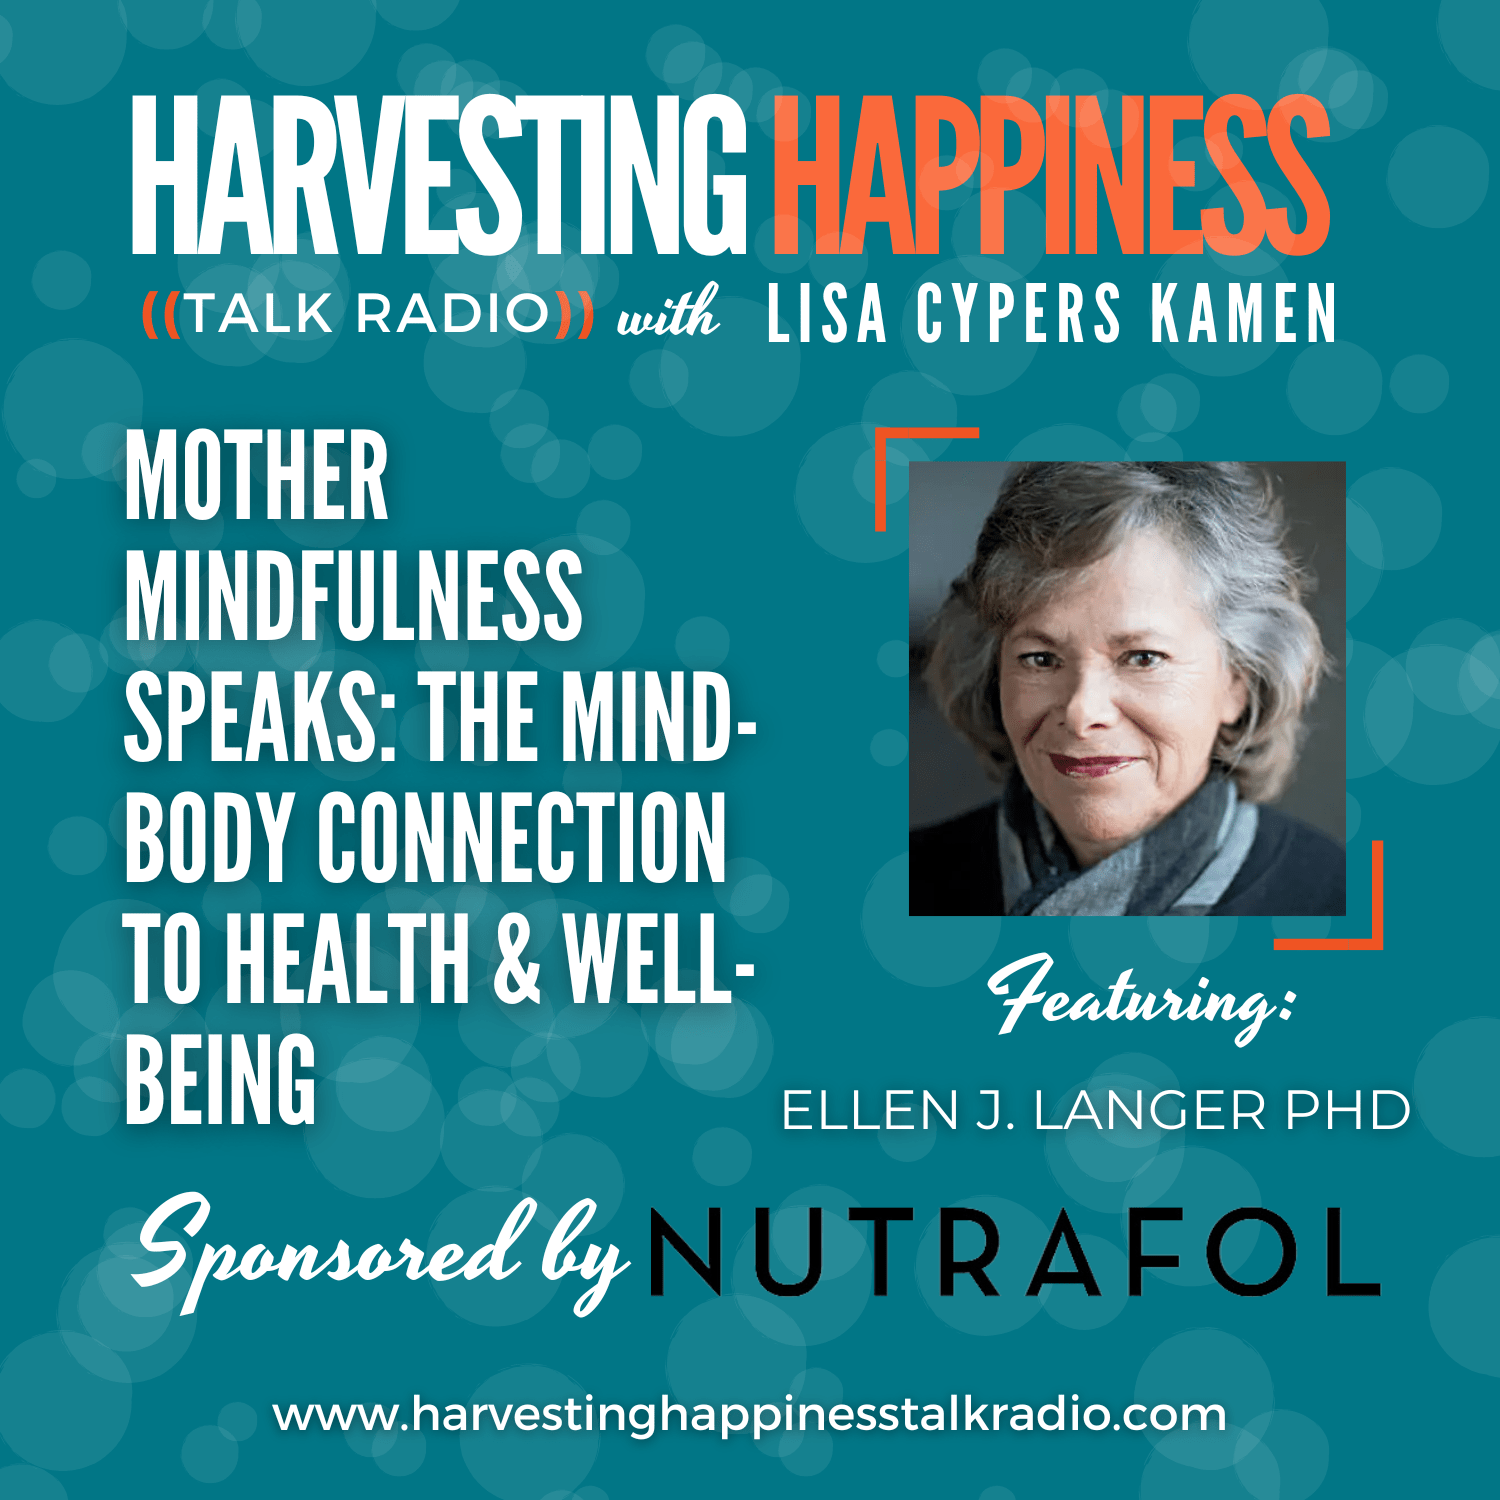 podcast episode about mindfulness, wellbeing and the mind body connection